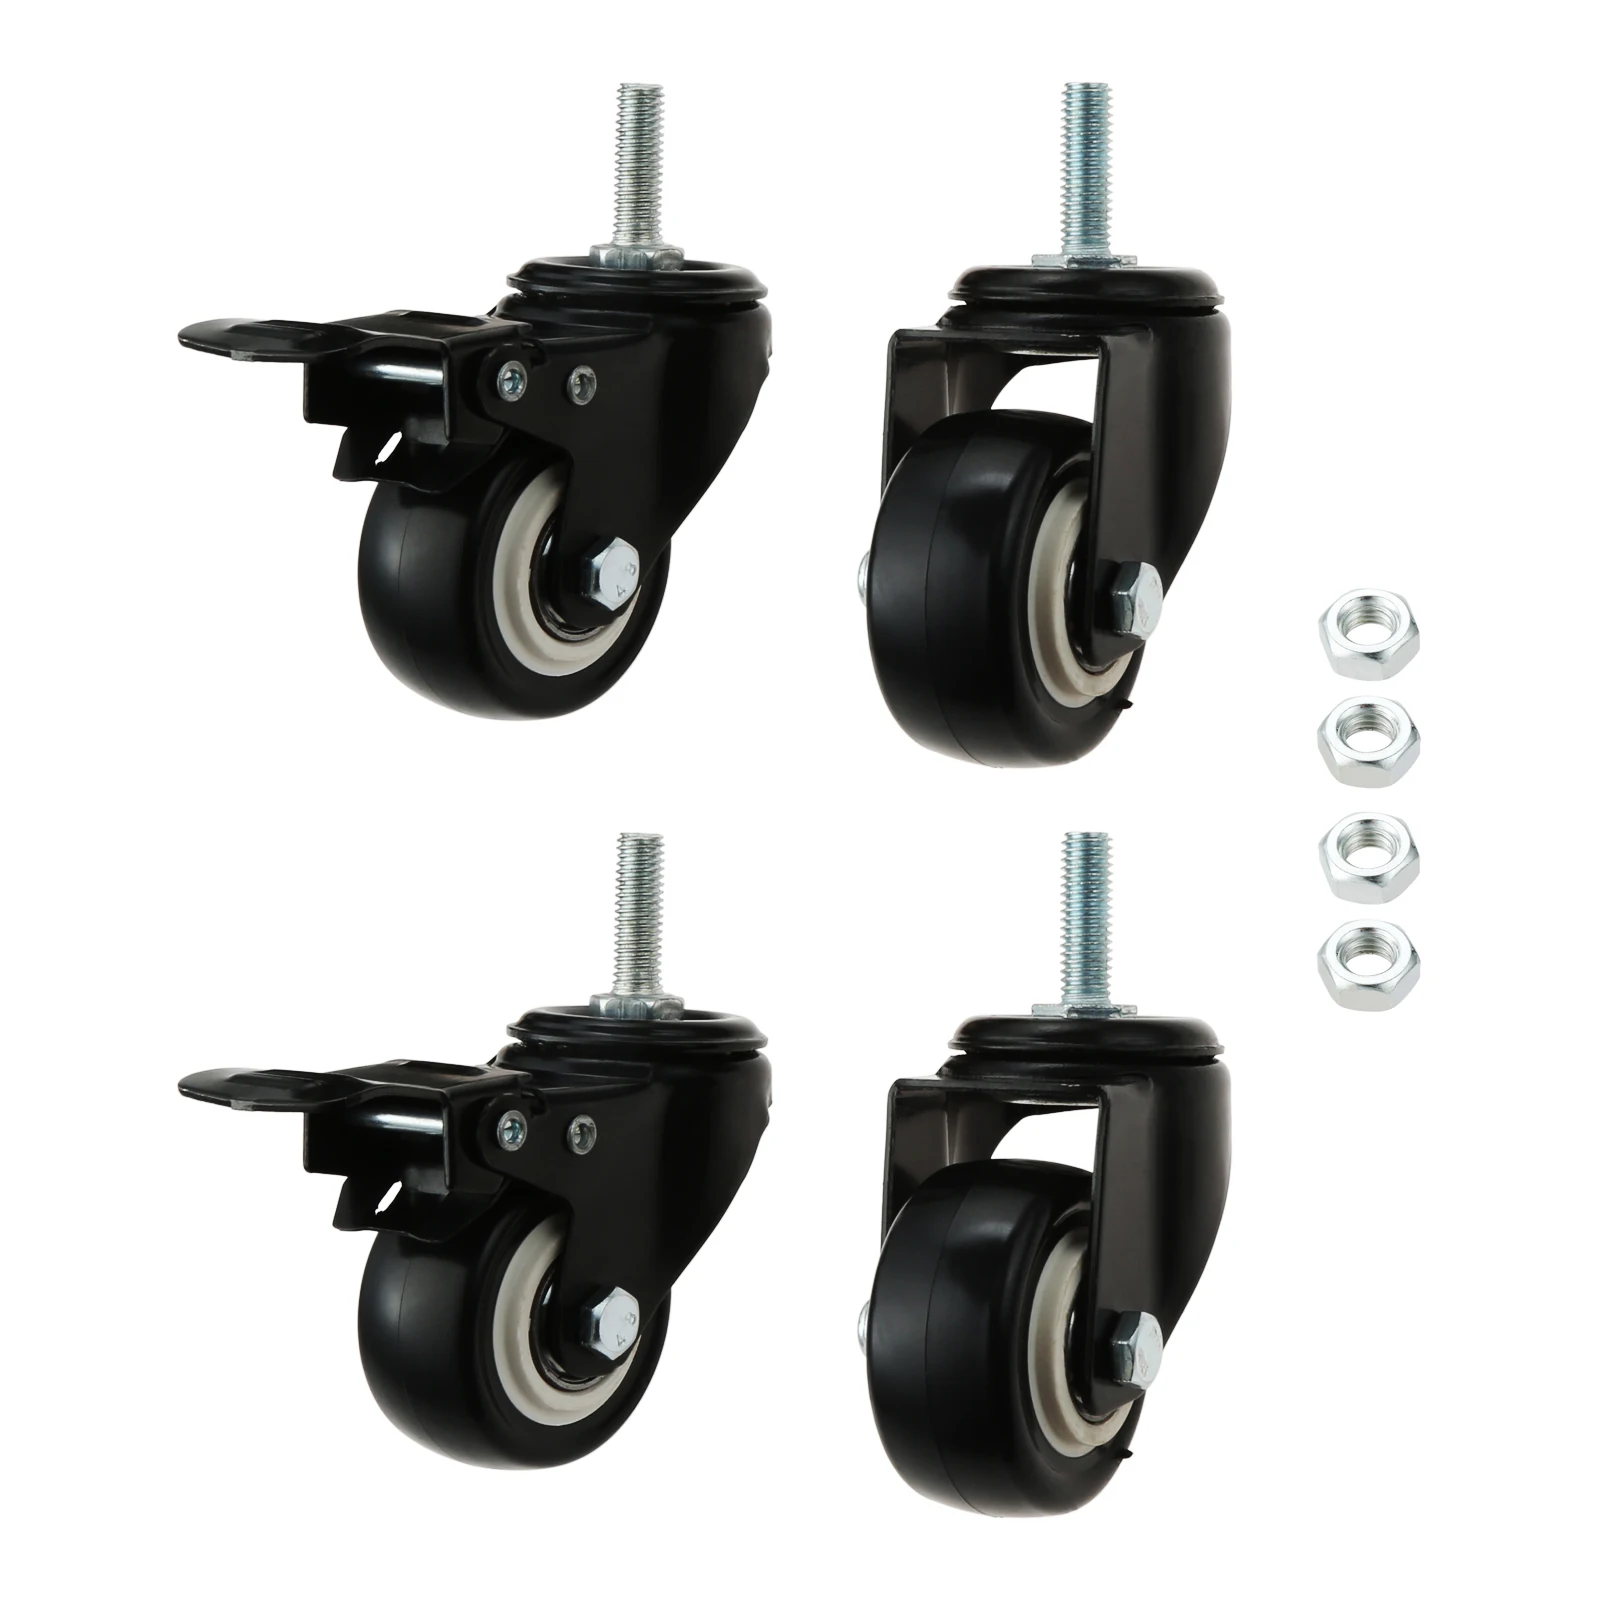 

4pcs 2 inch Casters Heavy Duty Swivel PU Mute Wheels with/without Brakes No Noise Double Lock for Flight Case Cart Trolley Chair